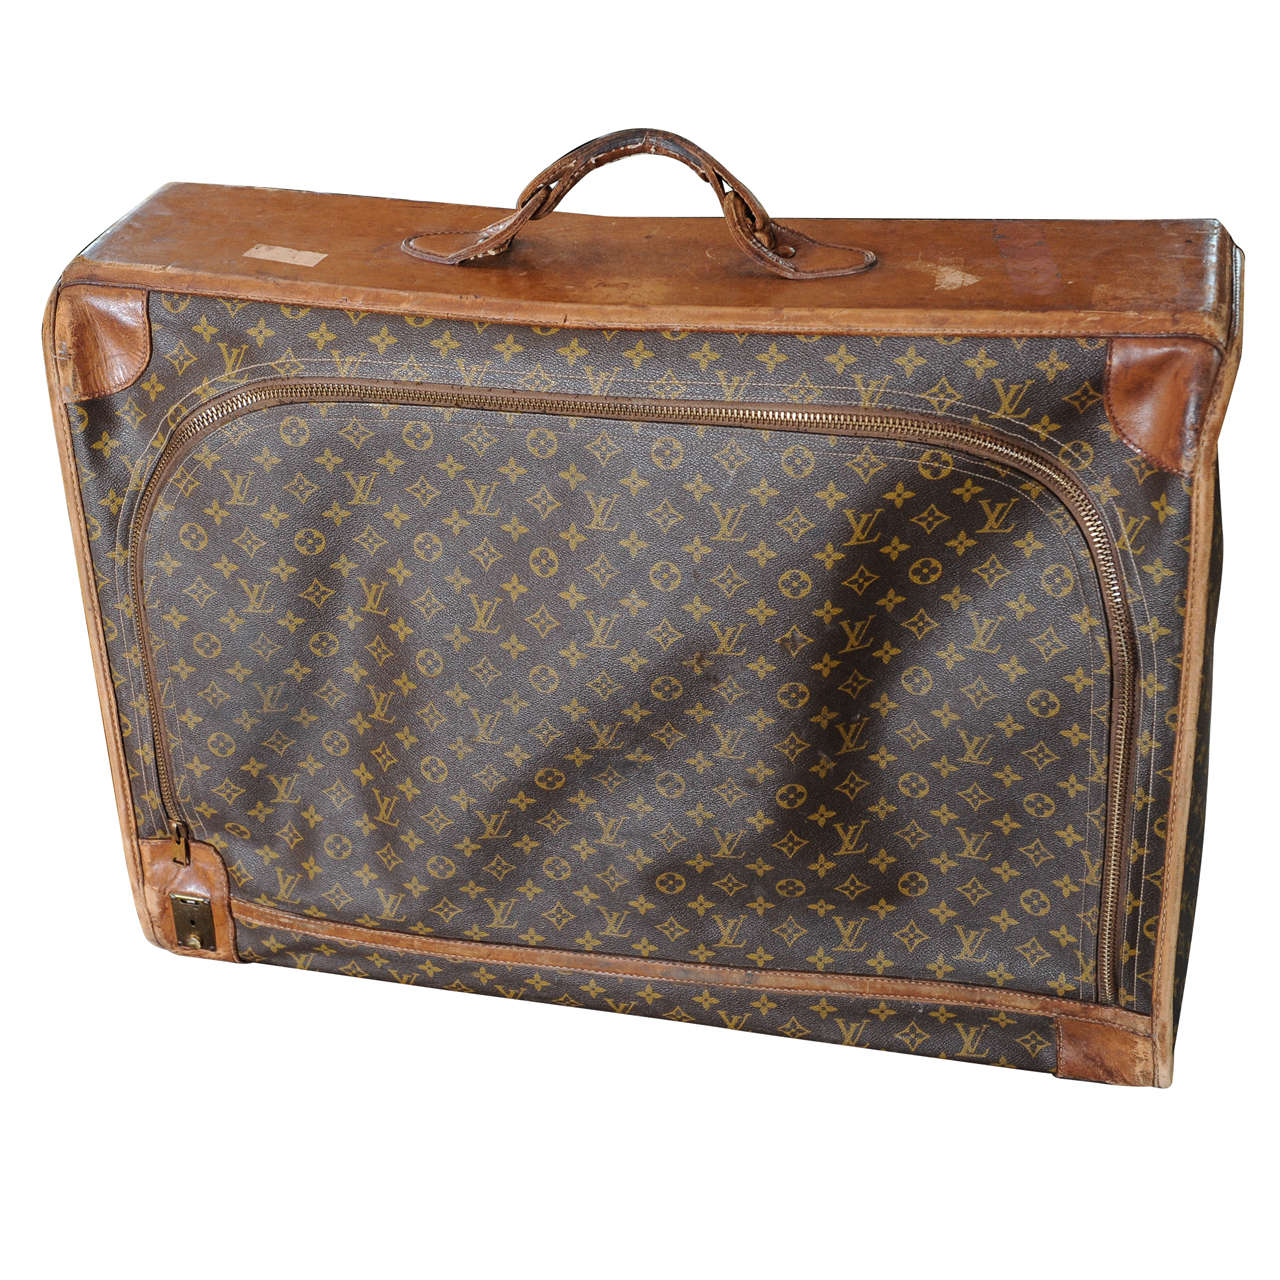 A vintage Louis Vuitton monogram leather suitcase / luggage at 1stdibs